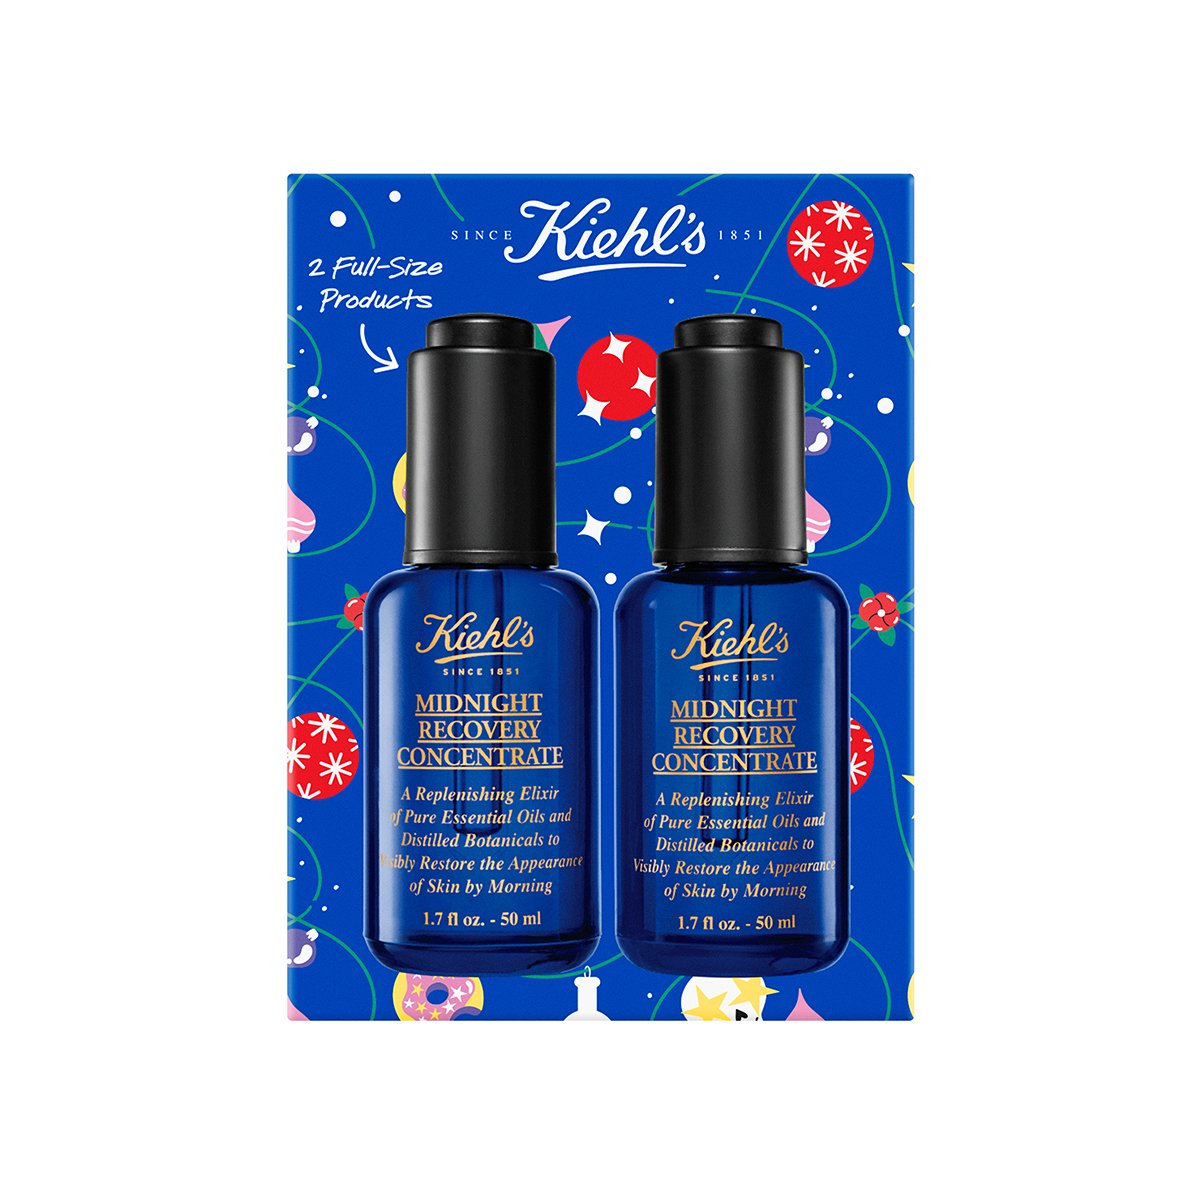 Kiehl's Holiday 2021 Midnight recovery concentrate duo 50ml